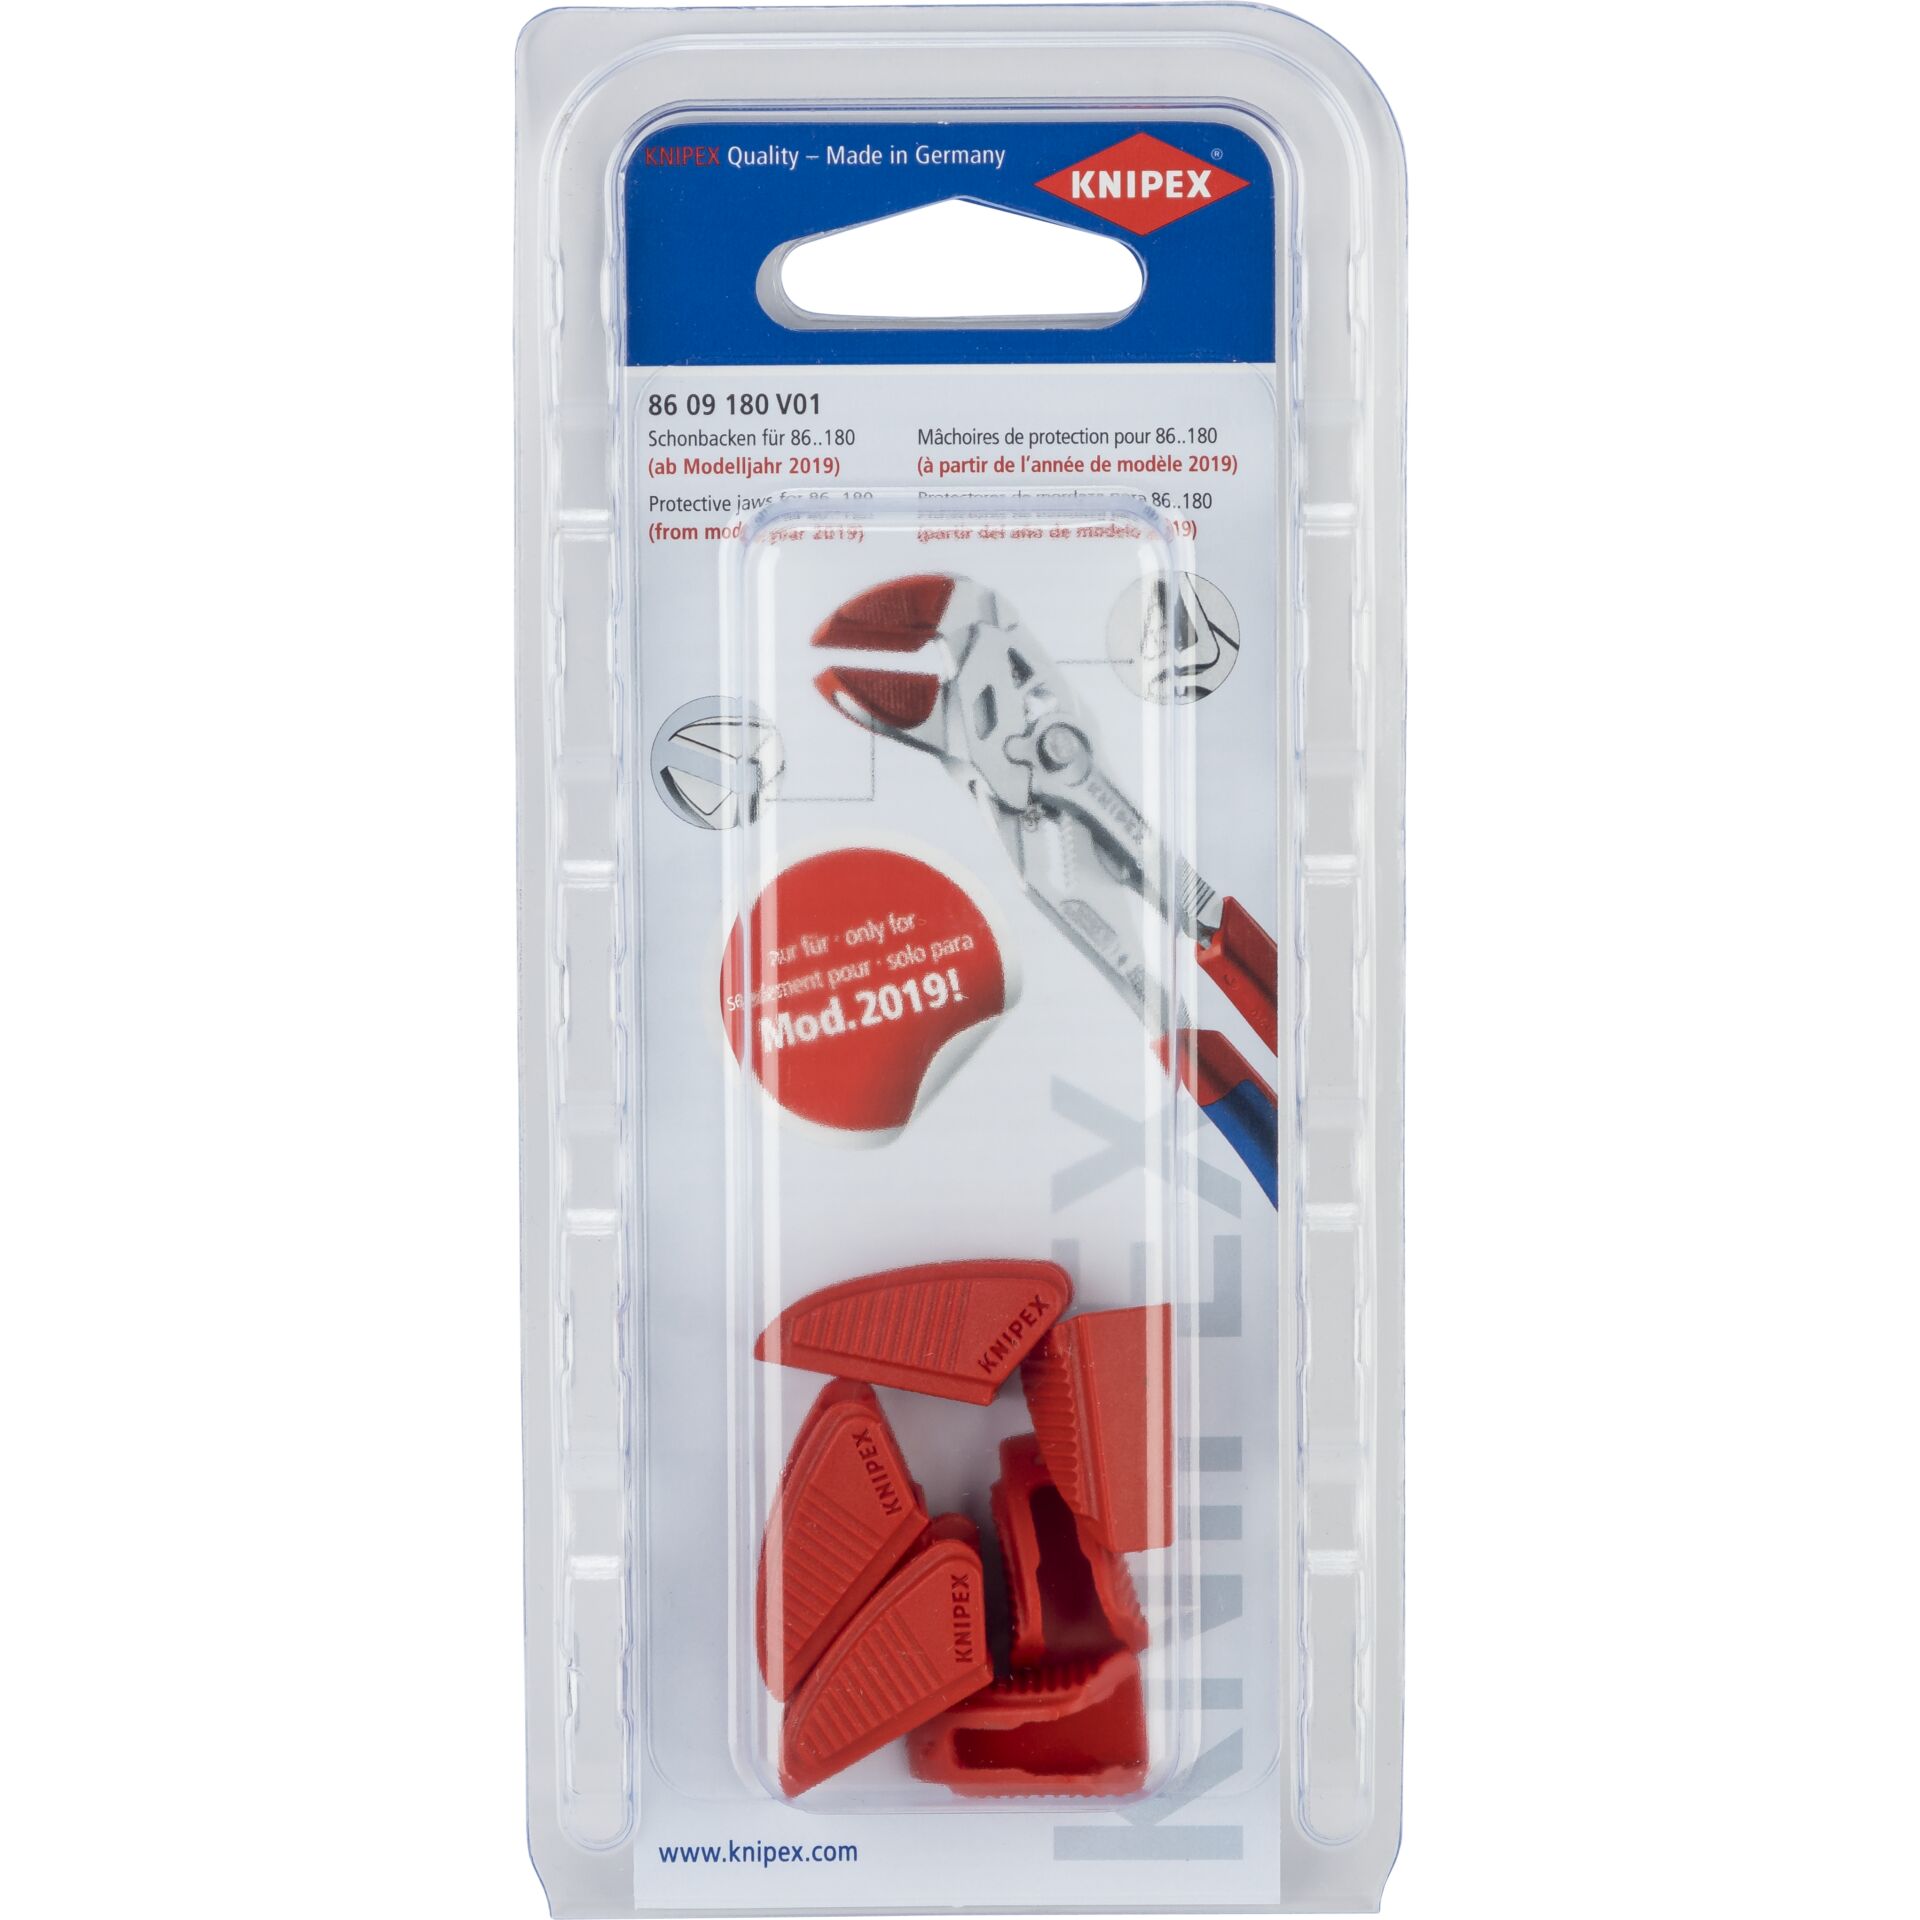 KNIPEX Protective Jaws 86 xx 180 (3 Pairs)